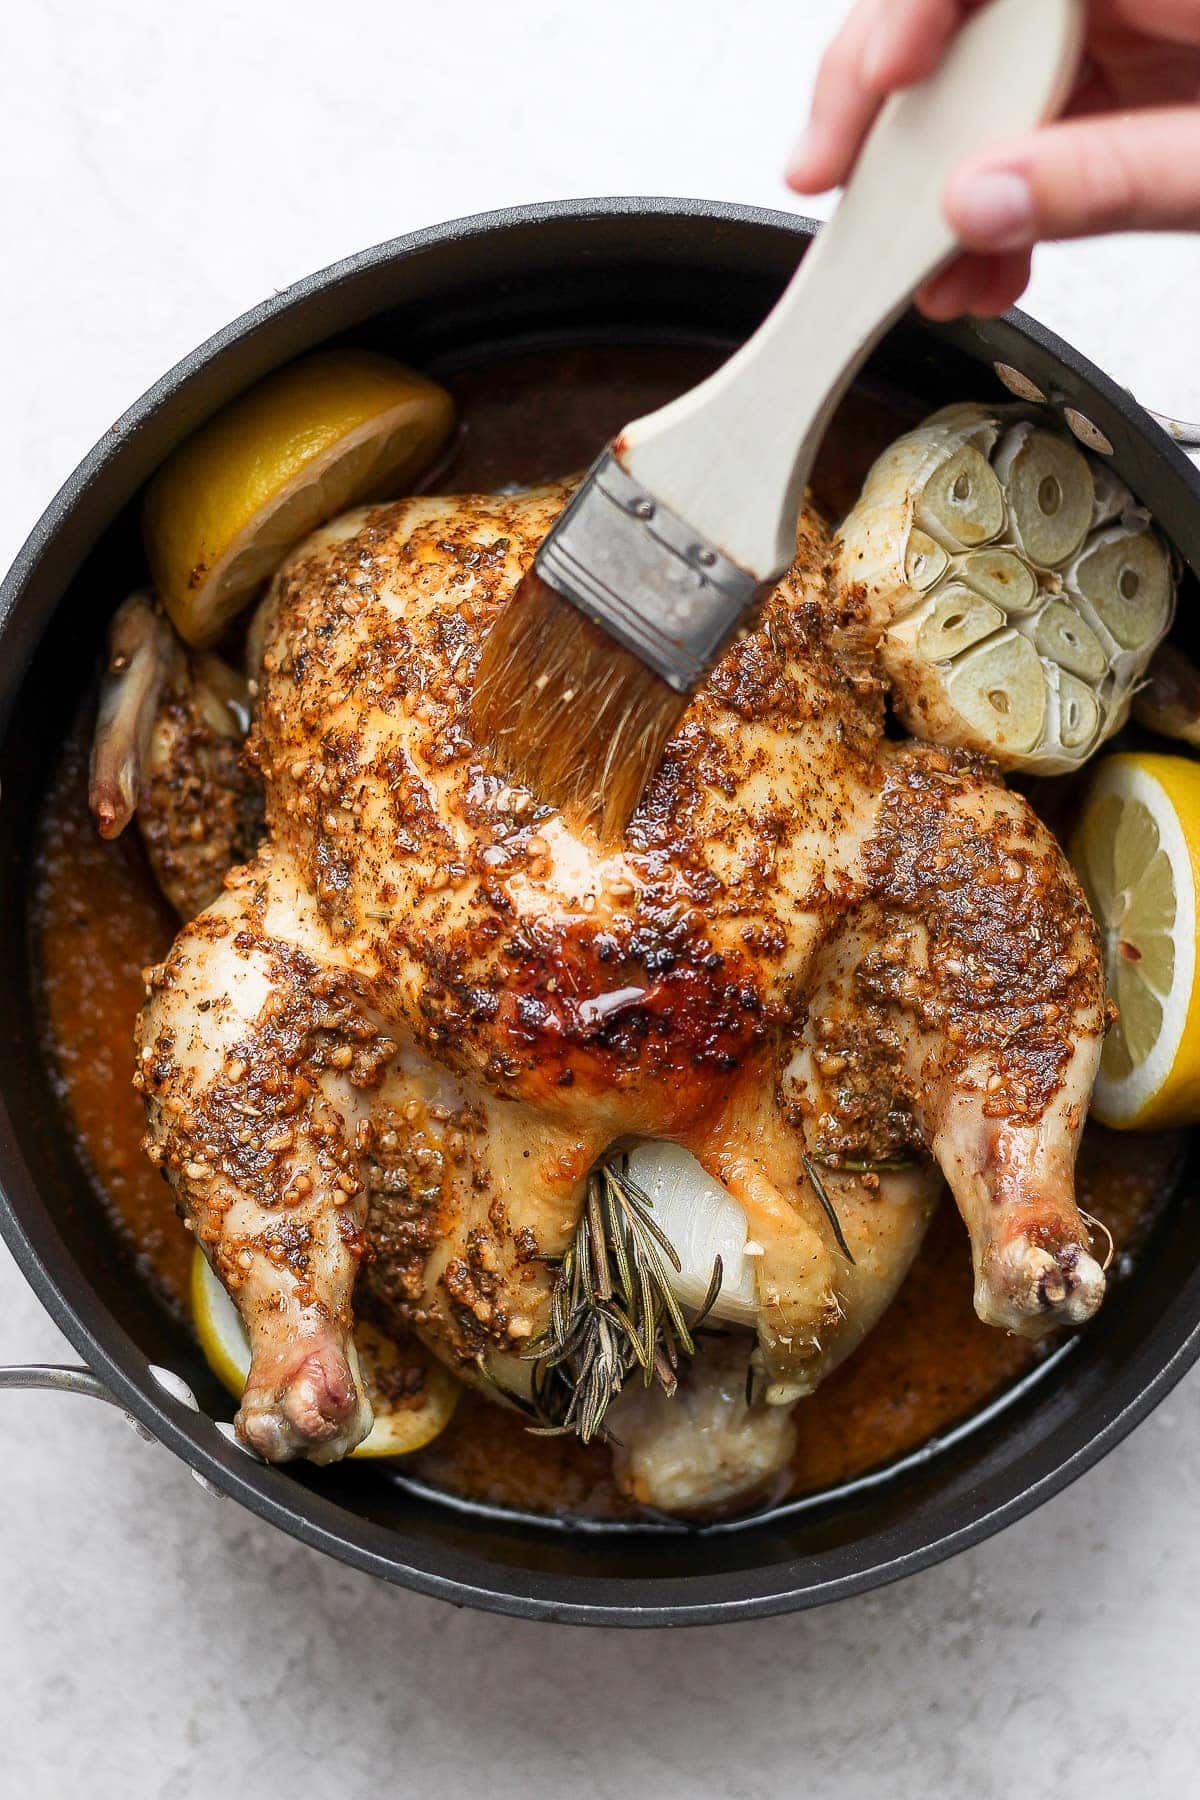 https://fitfoodiefinds.com/wp-content/uploads/2020/10/roasted-chicken-7.jpg